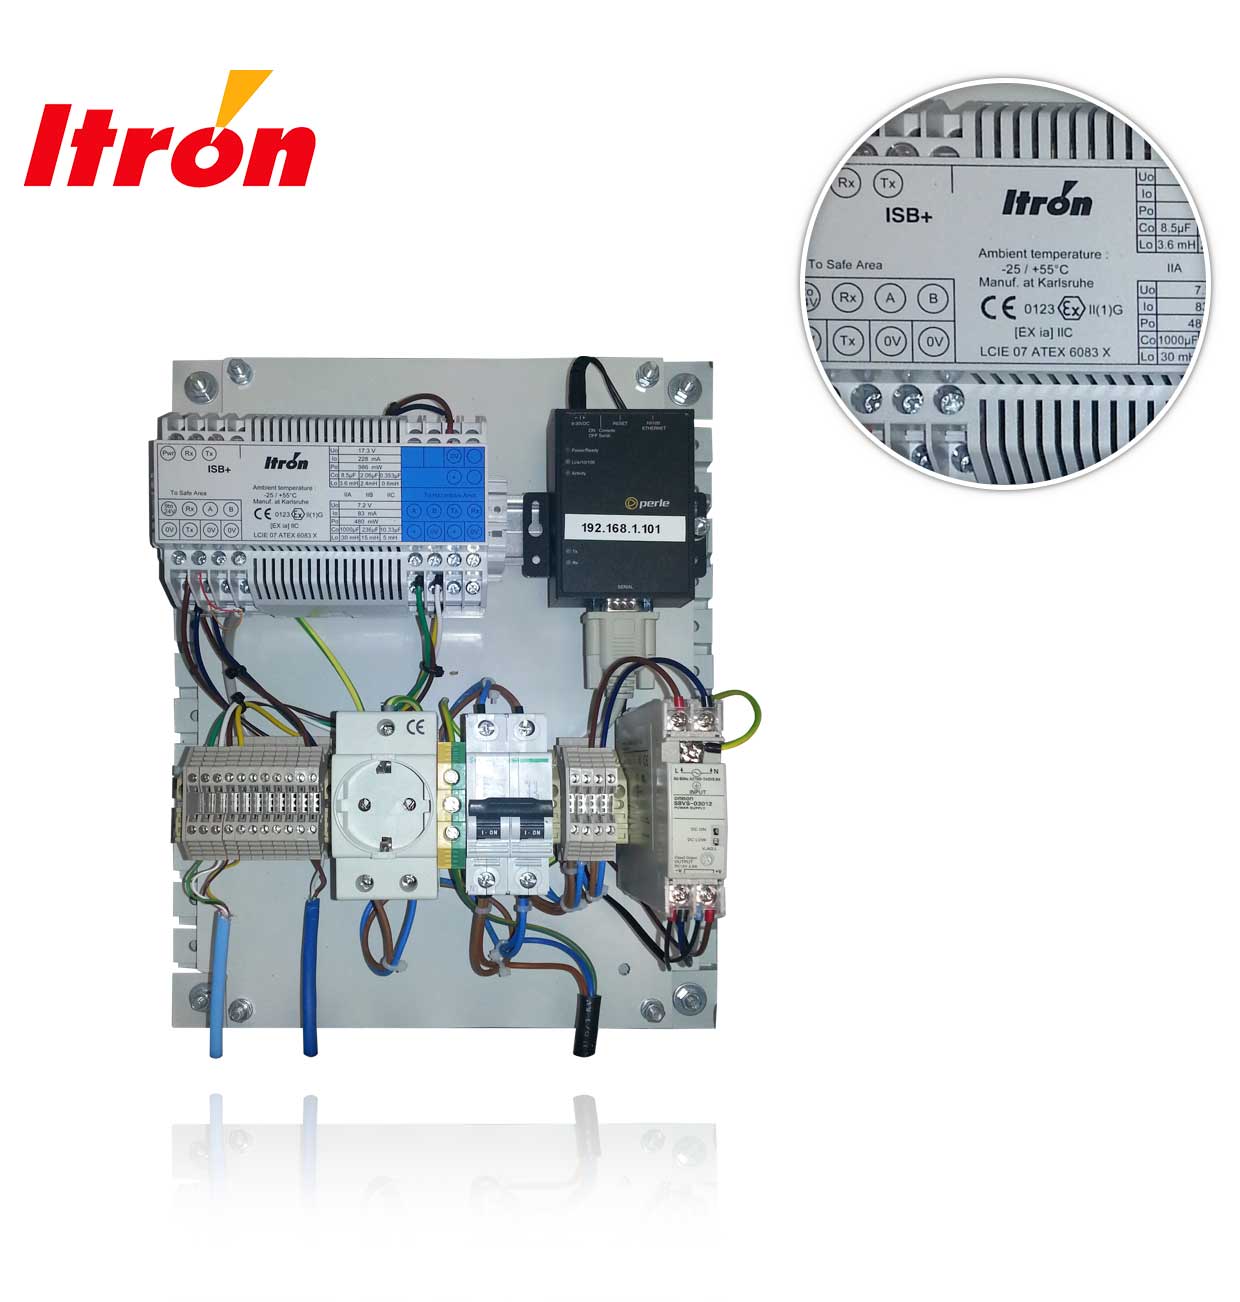 IFC-ETH ITRON Iflag ETHERNET COMMUNICATION, REMOTE METERING CABINETS, ITRON GAS CONSUMPTION MONITORING